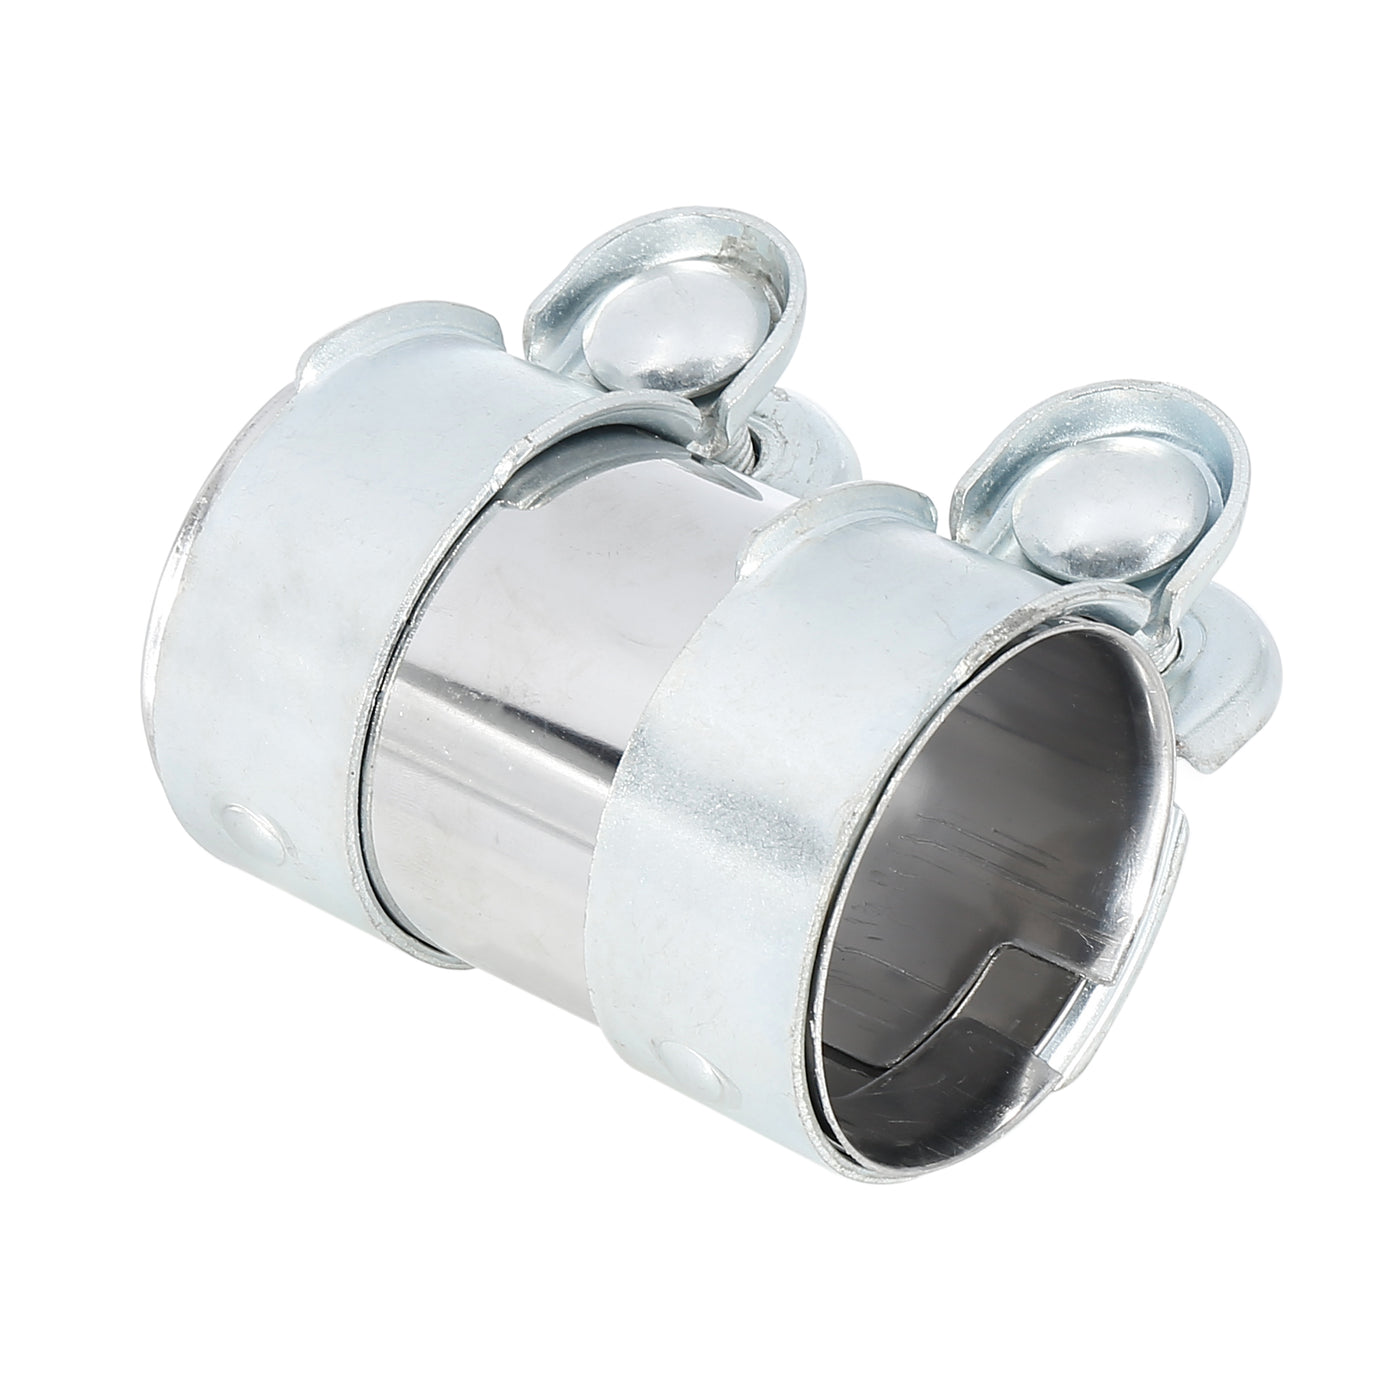 X AUTOHAUX Exhaust Pipe Sleeve Connector Clamp Coupler for Seat Toledo Ibiza 56 x 94 mm Silver Tone